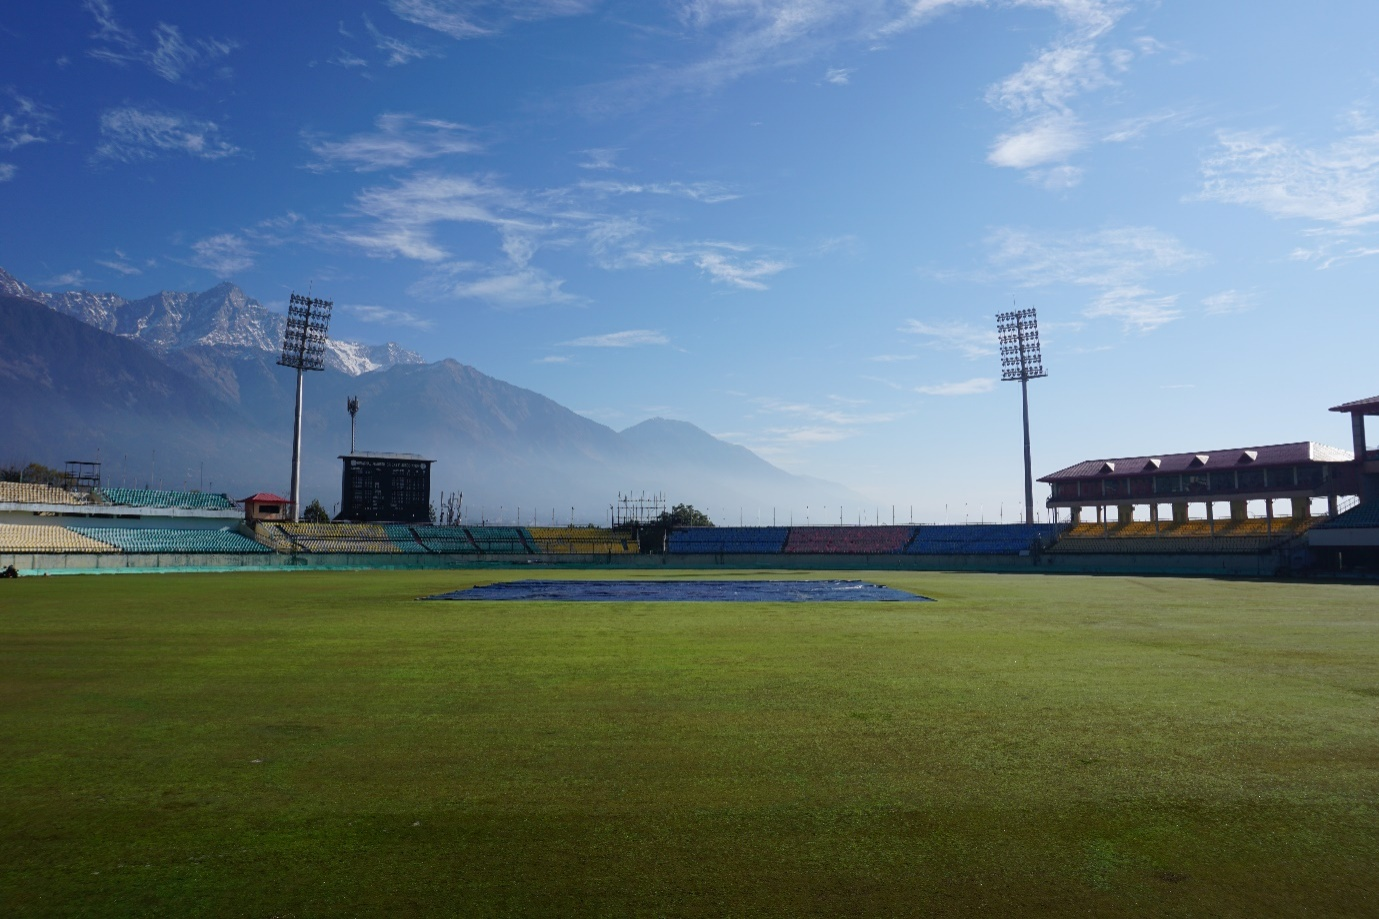 A cricket ground during the day